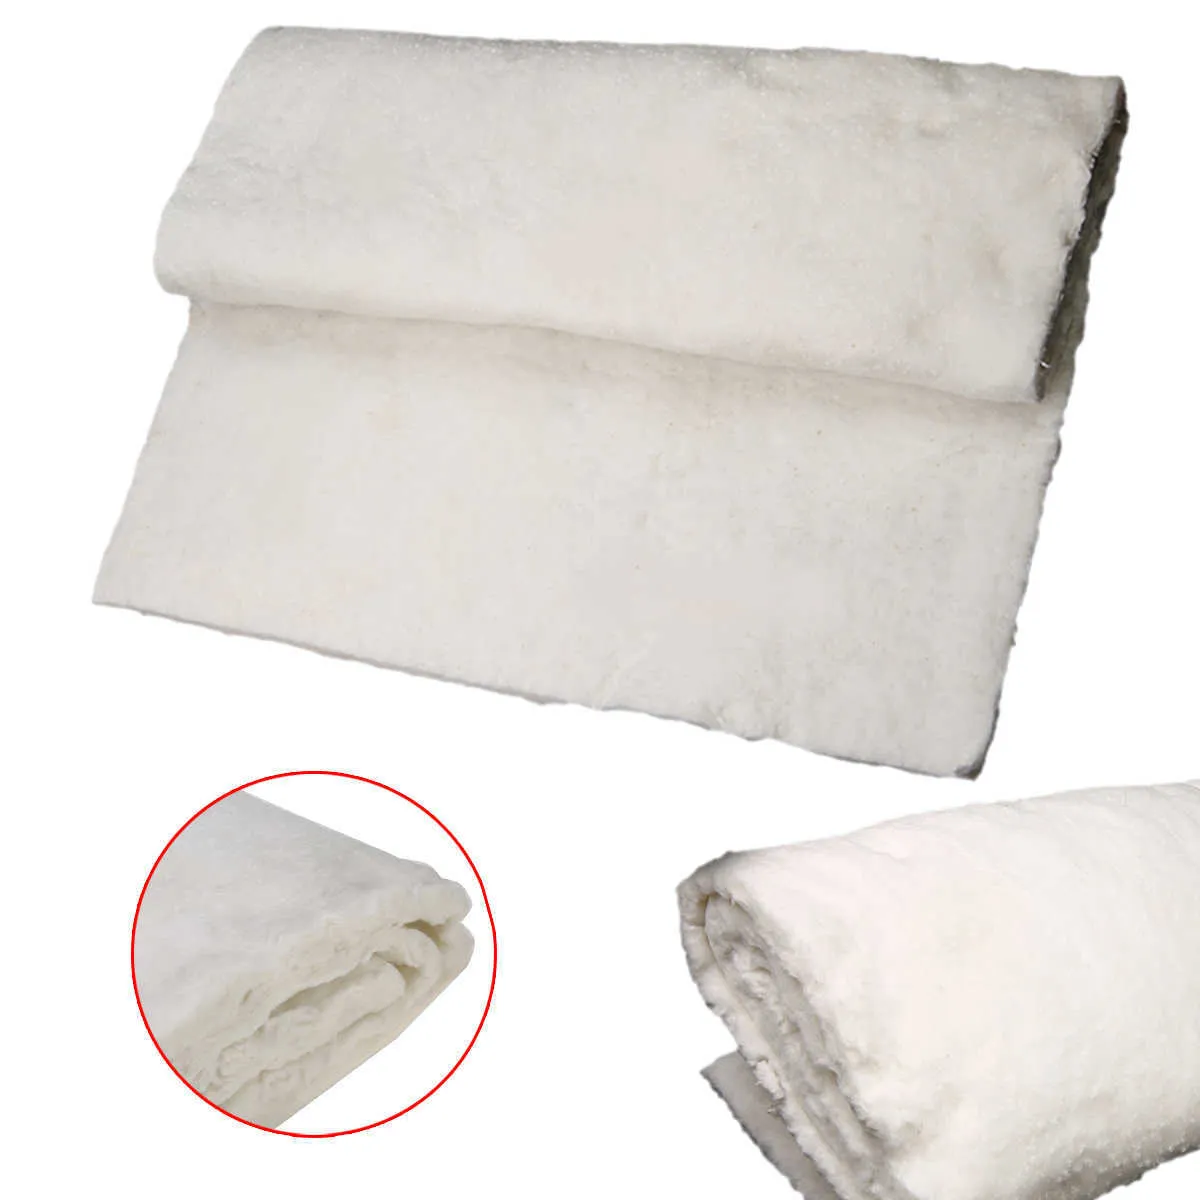 New 61cmx100cm White Ceramic Fiber Blanket High Temperature Thermal Insulation Cotton Refractory Fireproof Blanket New